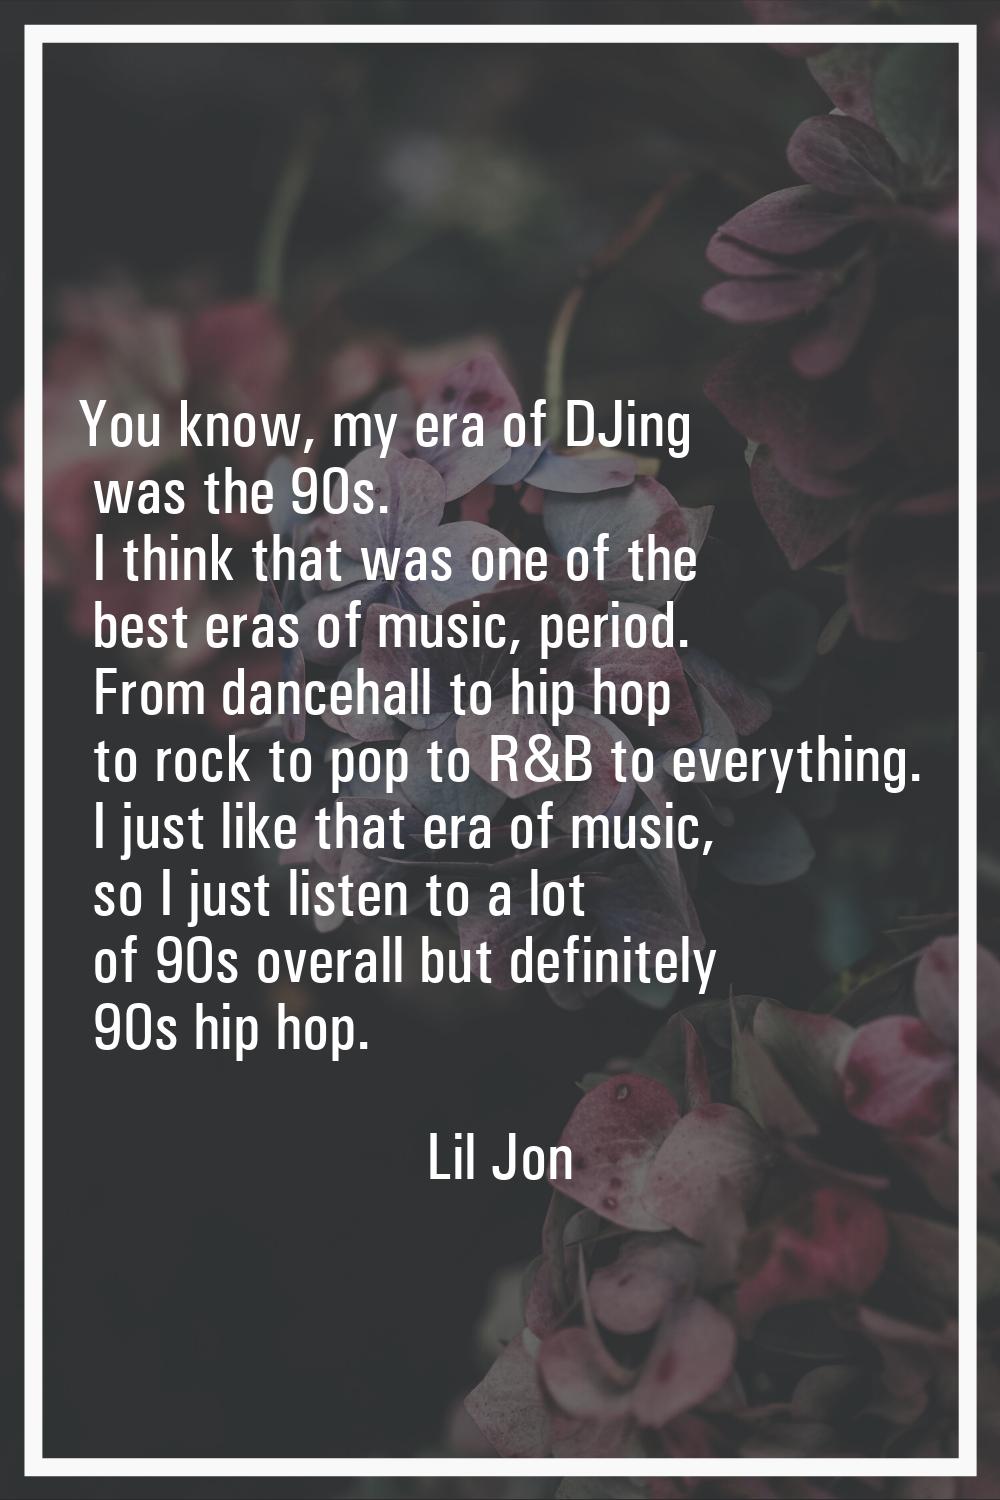 You know, my era of DJing was the 90s. I think that was one of the best eras of music, period. From